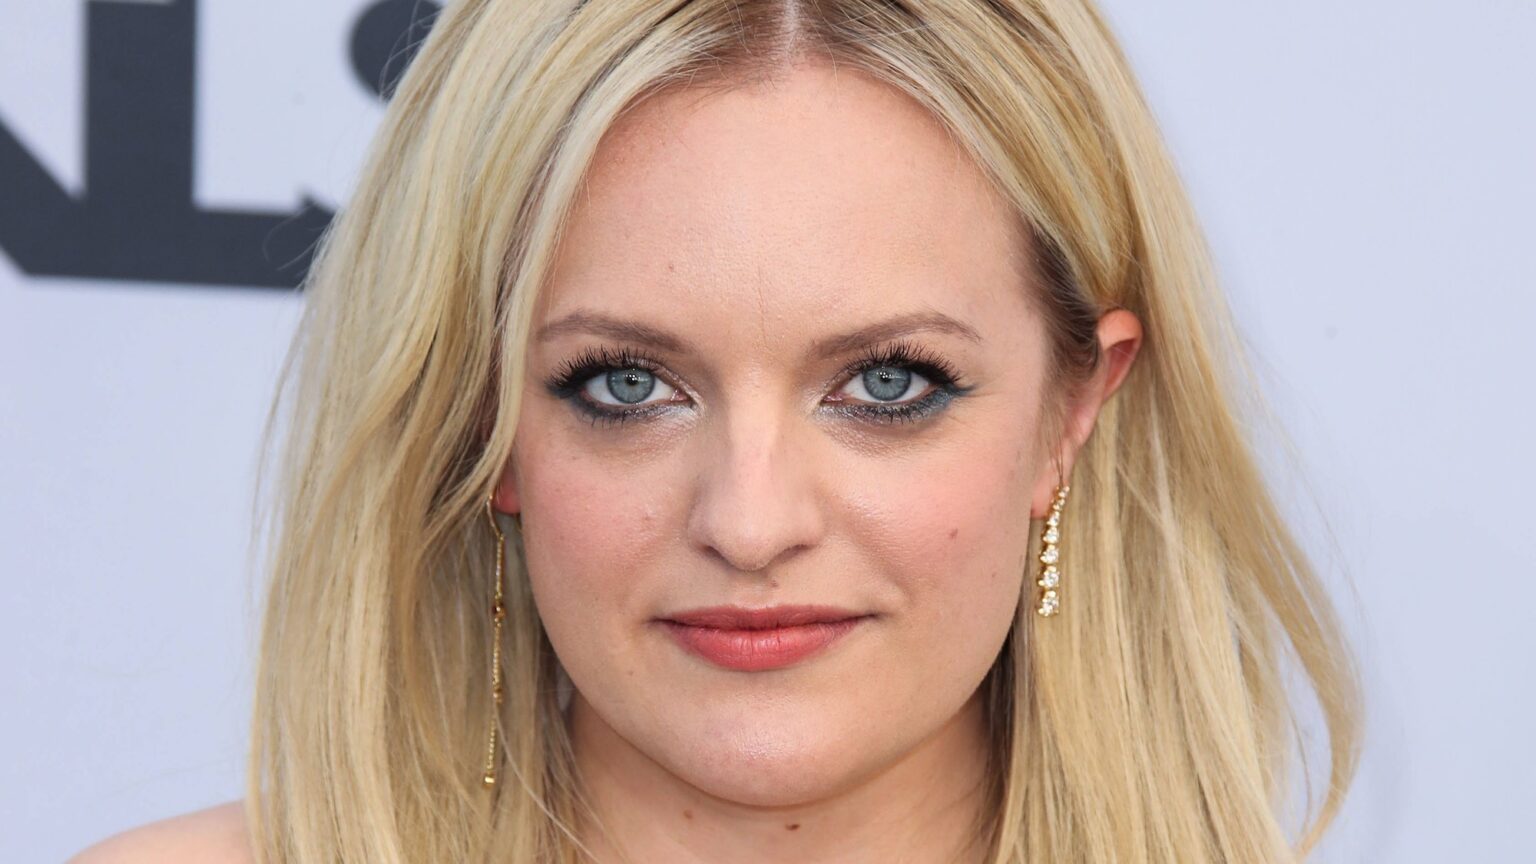 Fans of Scientologist actors and musicians like Elisabeth Moss wonder why she is still involved. Here are other celebrity Scientologists.